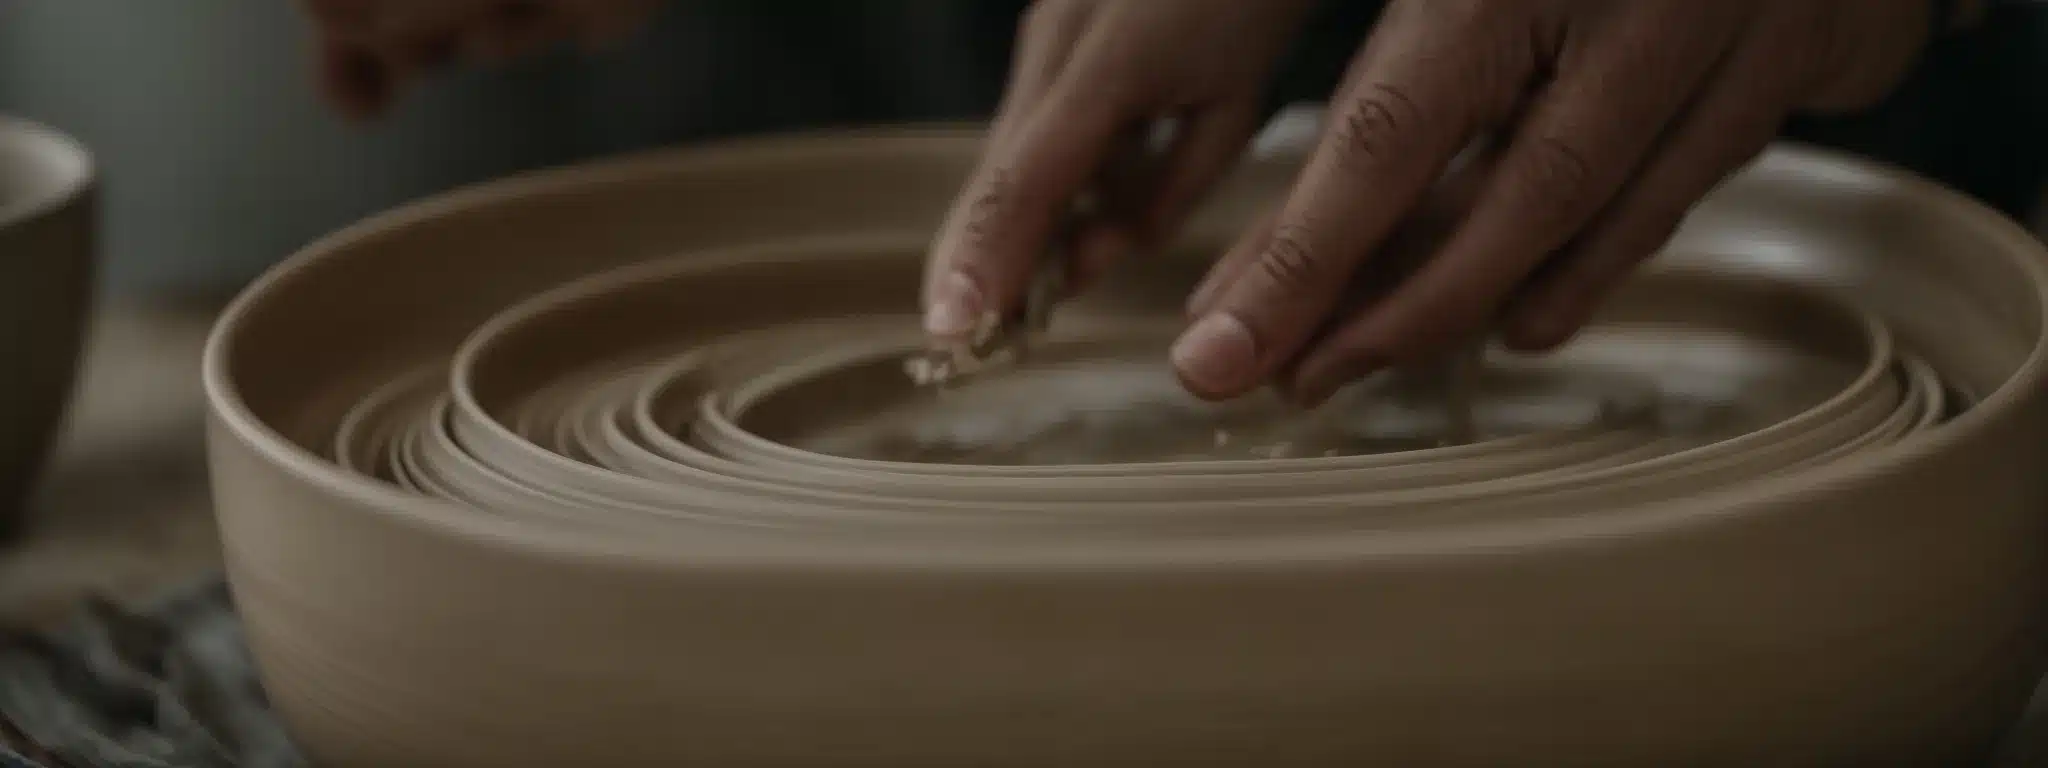 A Potter'S Hands Shaping A Clay Vessel On A Spinning Wheel, Symbolizing The Careful Crafting Of Customer Relationships.